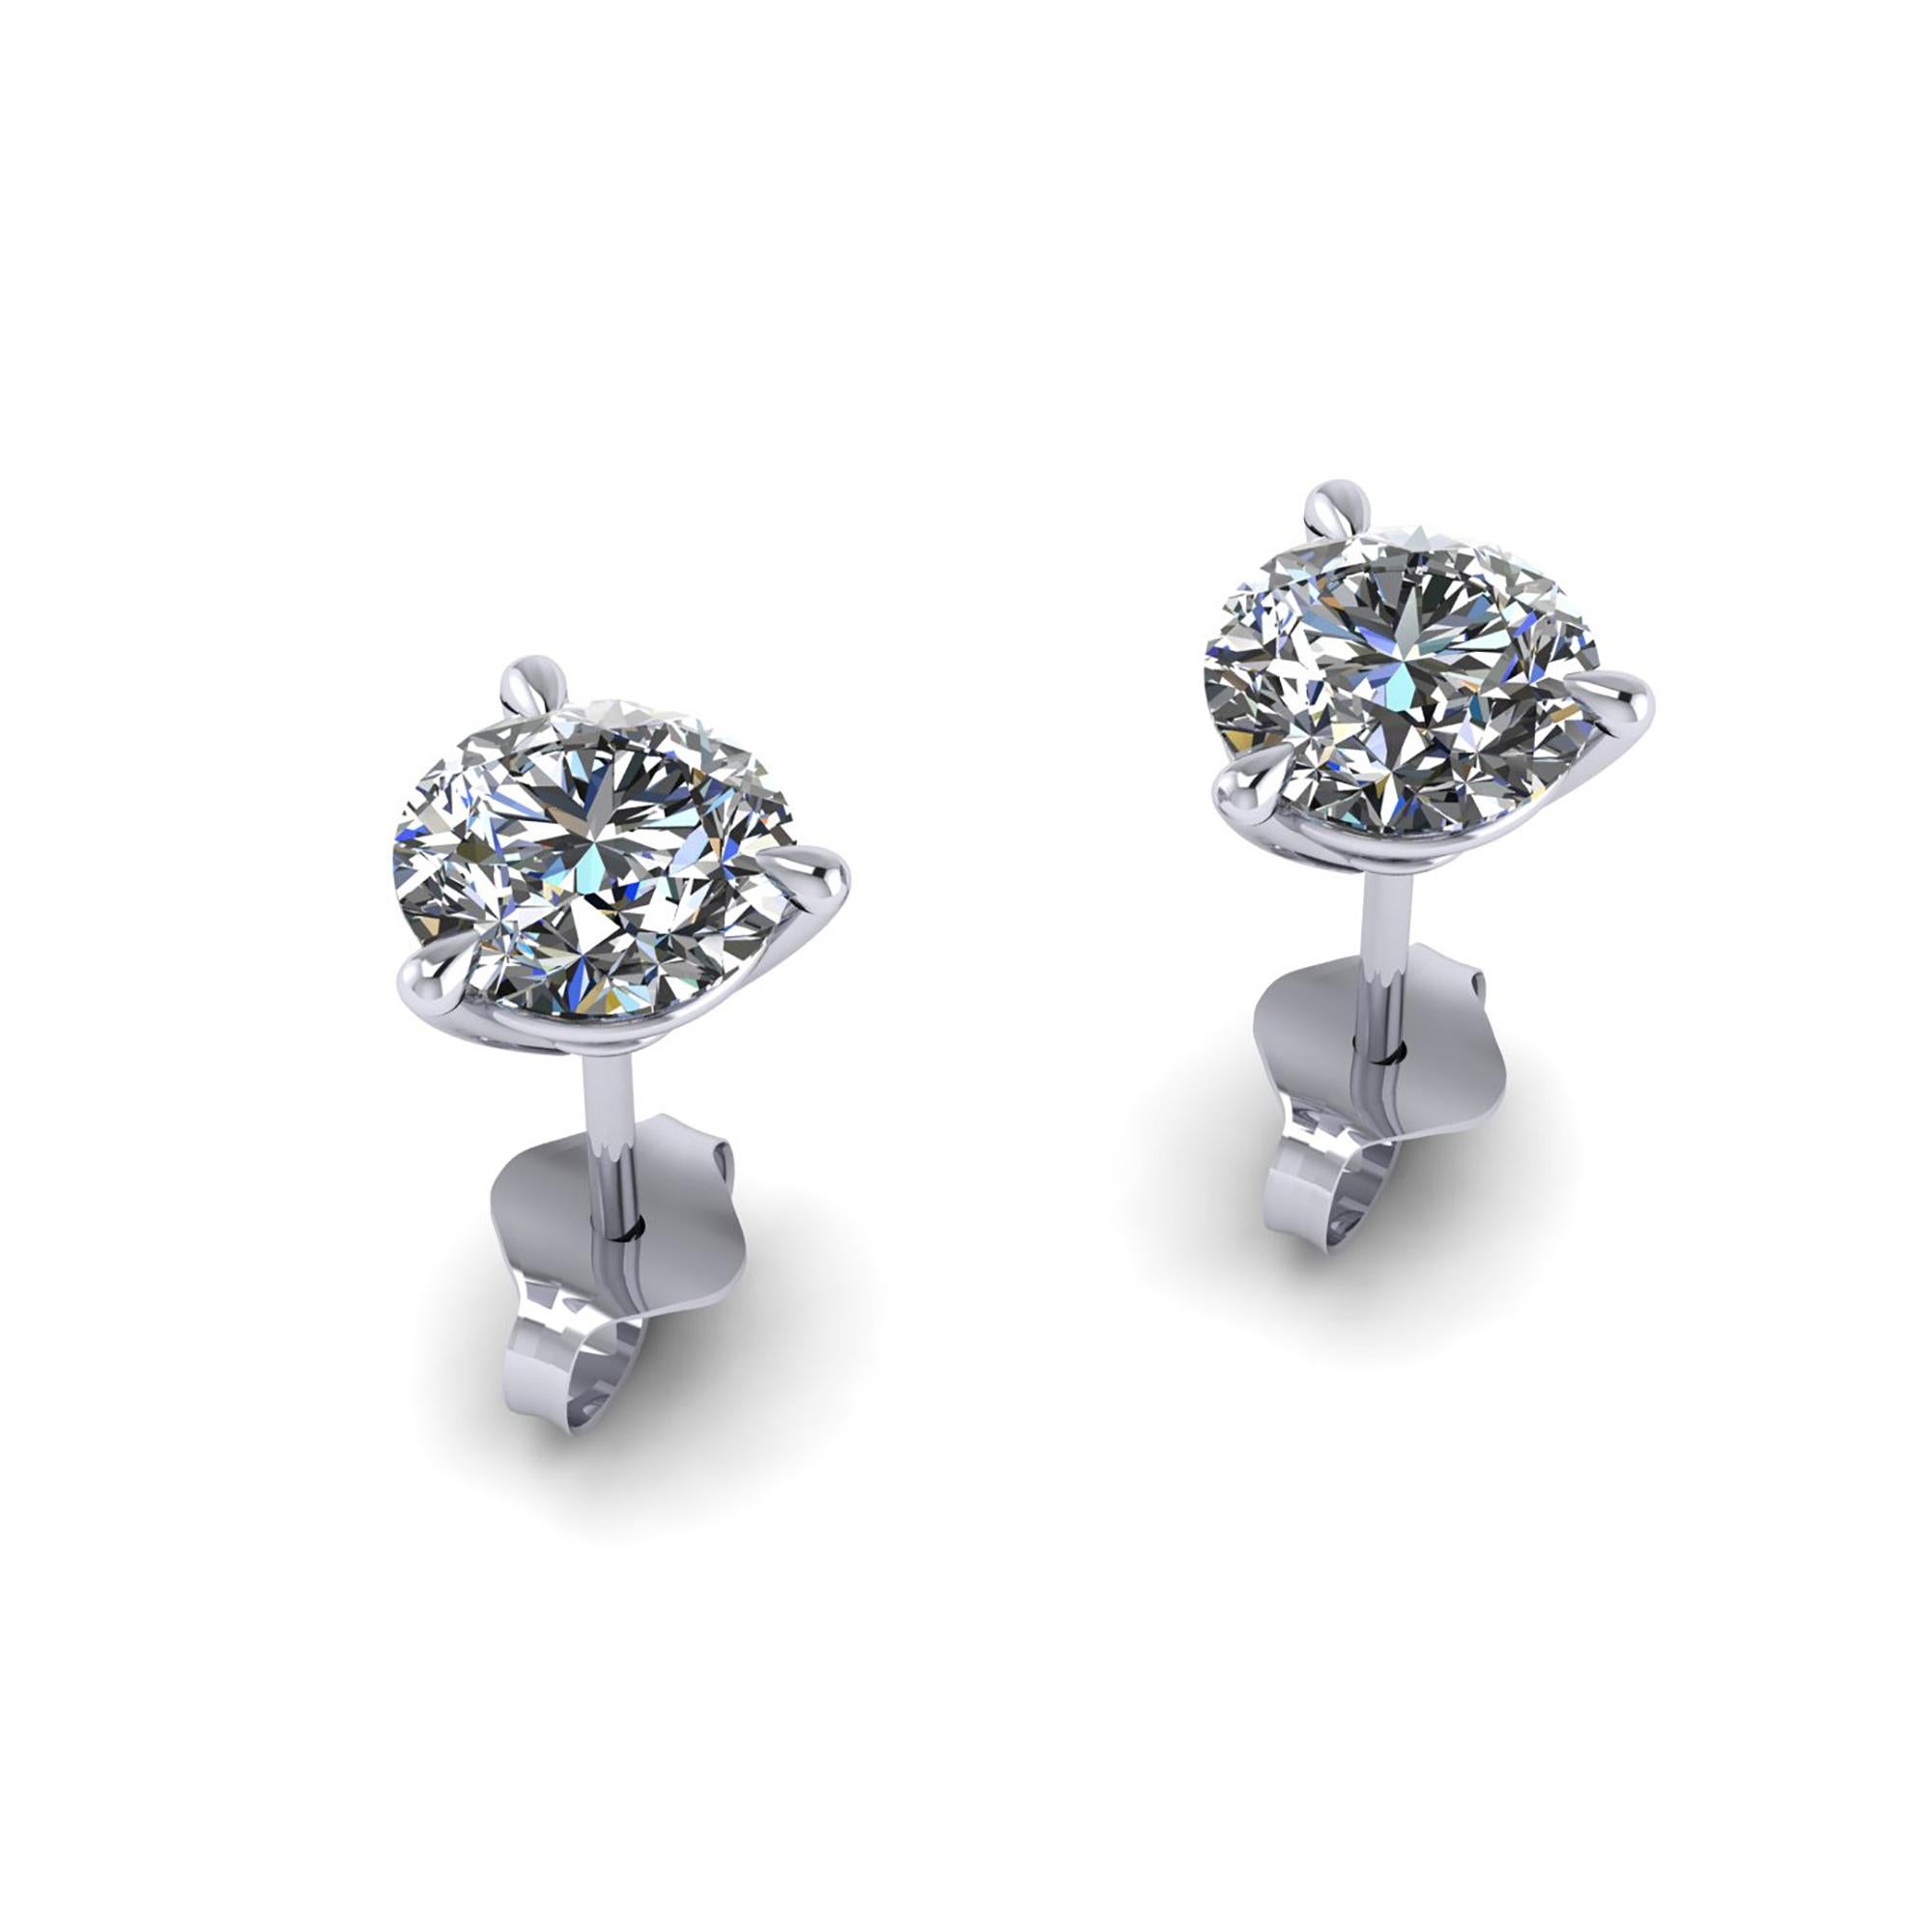 GIA Certified 2.00 Carat  Round Diamonds H color, VS2 clarity, Triple Excellent,  Martini Studs made in Platinum in New York, 
Inquire about availability of different diamond options